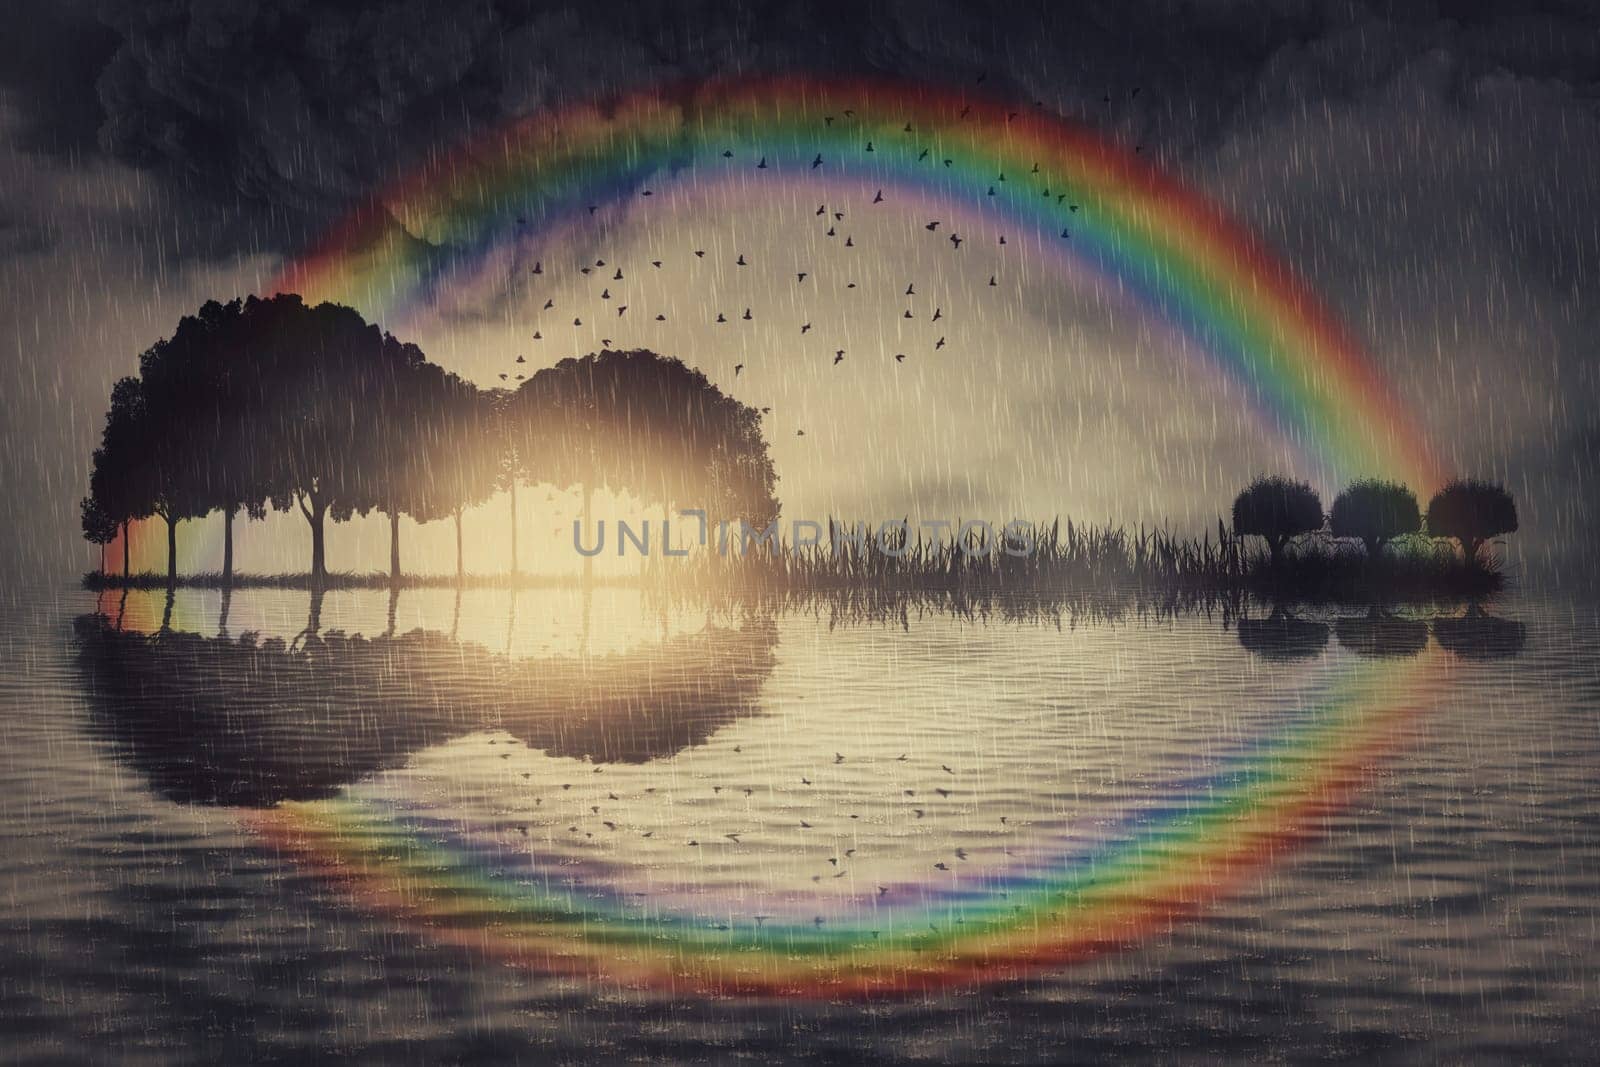 Guitar music island over the rainbow concept. Surreal seascape view with trees on an isle growing in the shape of an musical instrument, reflecting in the water, under a stormy sky background.